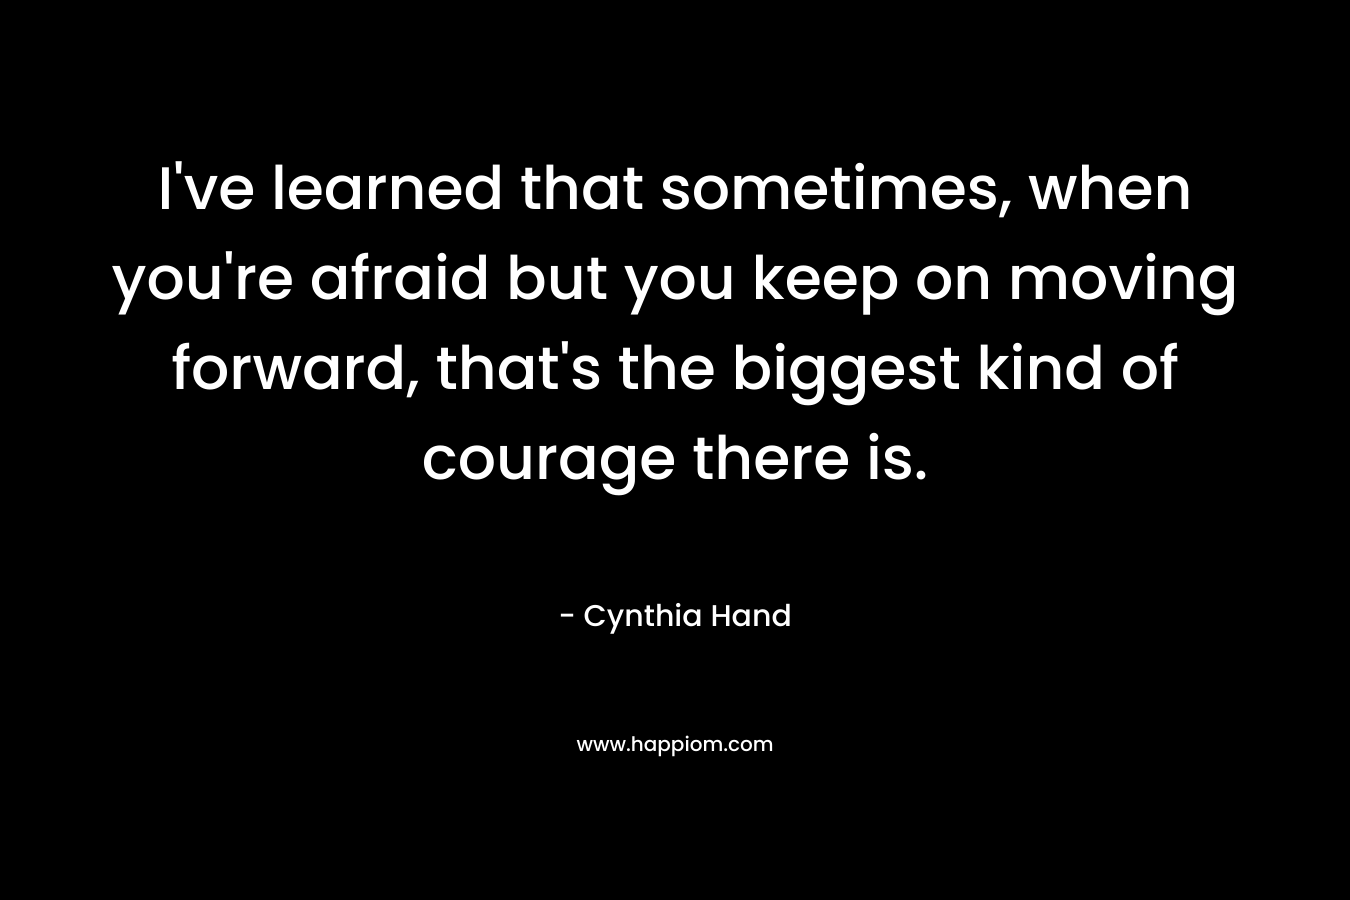 I’ve learned that sometimes, when you’re afraid but you keep on moving forward, that’s the biggest kind of courage there is. – Cynthia Hand